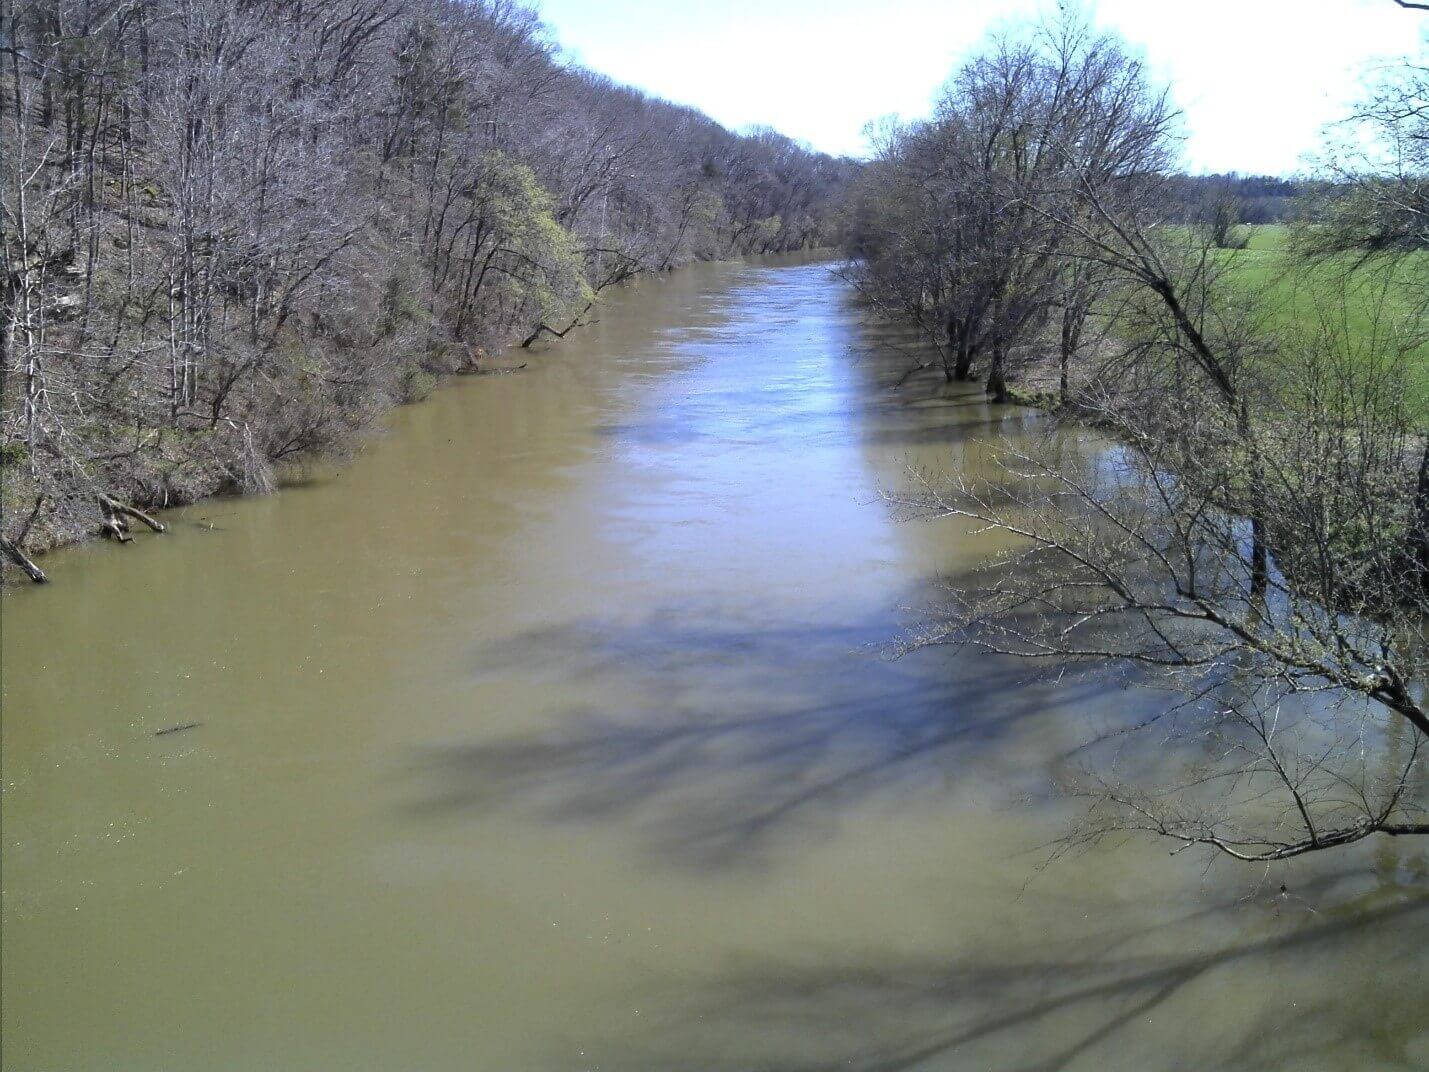 Monitoring rivers over a range of flows helps water managers better understand connections between dam releases and downstream conditions, knowledge which is useful when making operational decisions that affect human and ecological communities. Image shows Barren River roughly 22 miles downstream of the dam during outflows of approximately 4,600 cfs, March 2017.